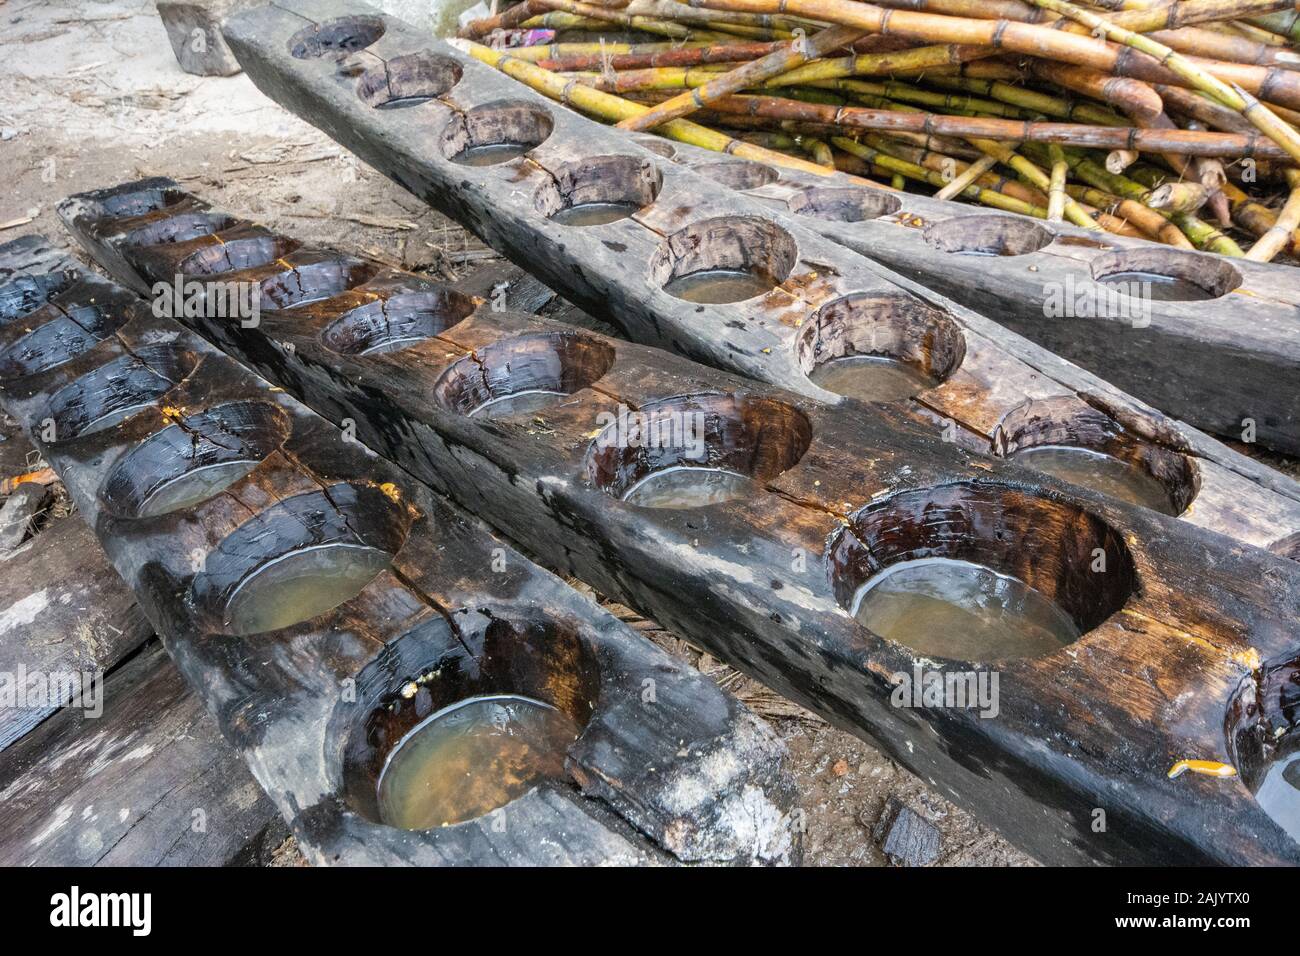 Wooden moulds and sugar cane for processing sugar into blocks in a traditional way in Amazonas in northern Peru Stock Photo